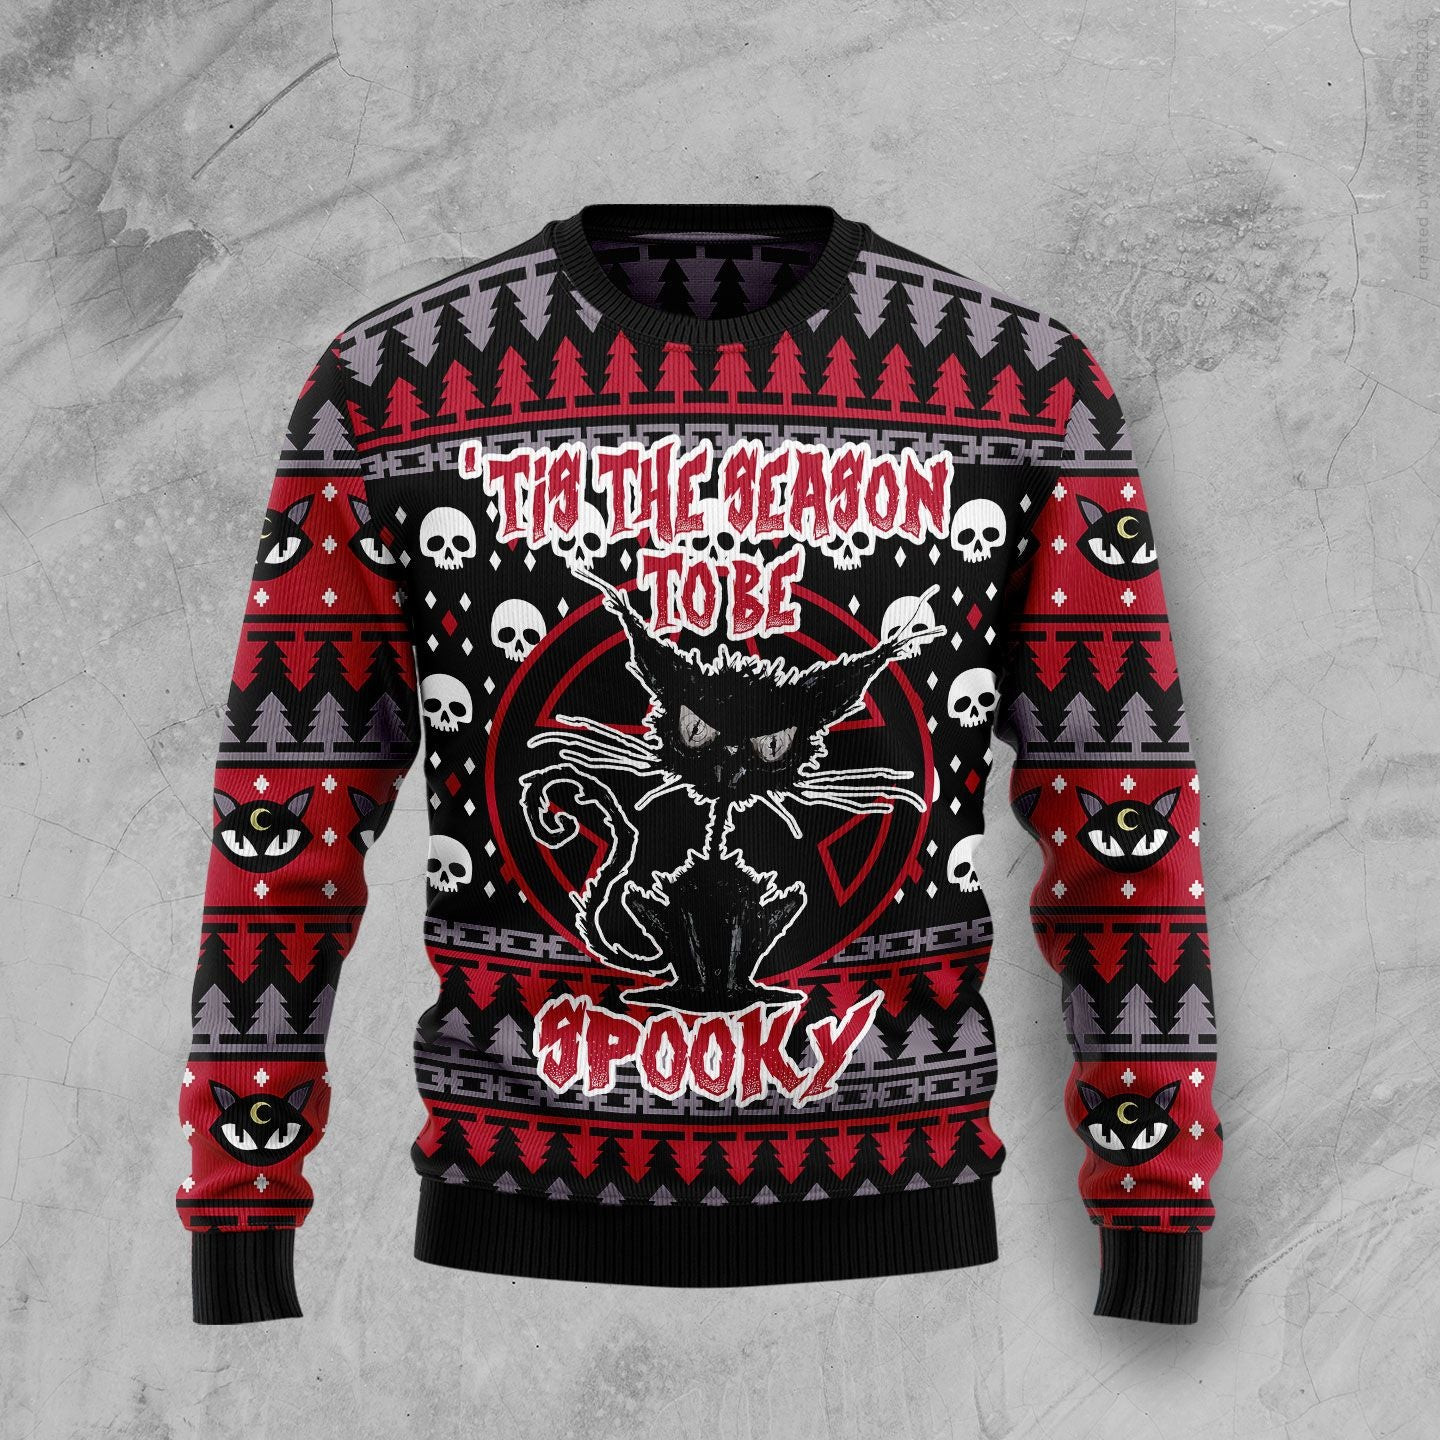 Black Cat Spooky Halloween Ugly Christmas Sweater, Ugly Sweater For Men Women, Holiday Sweater